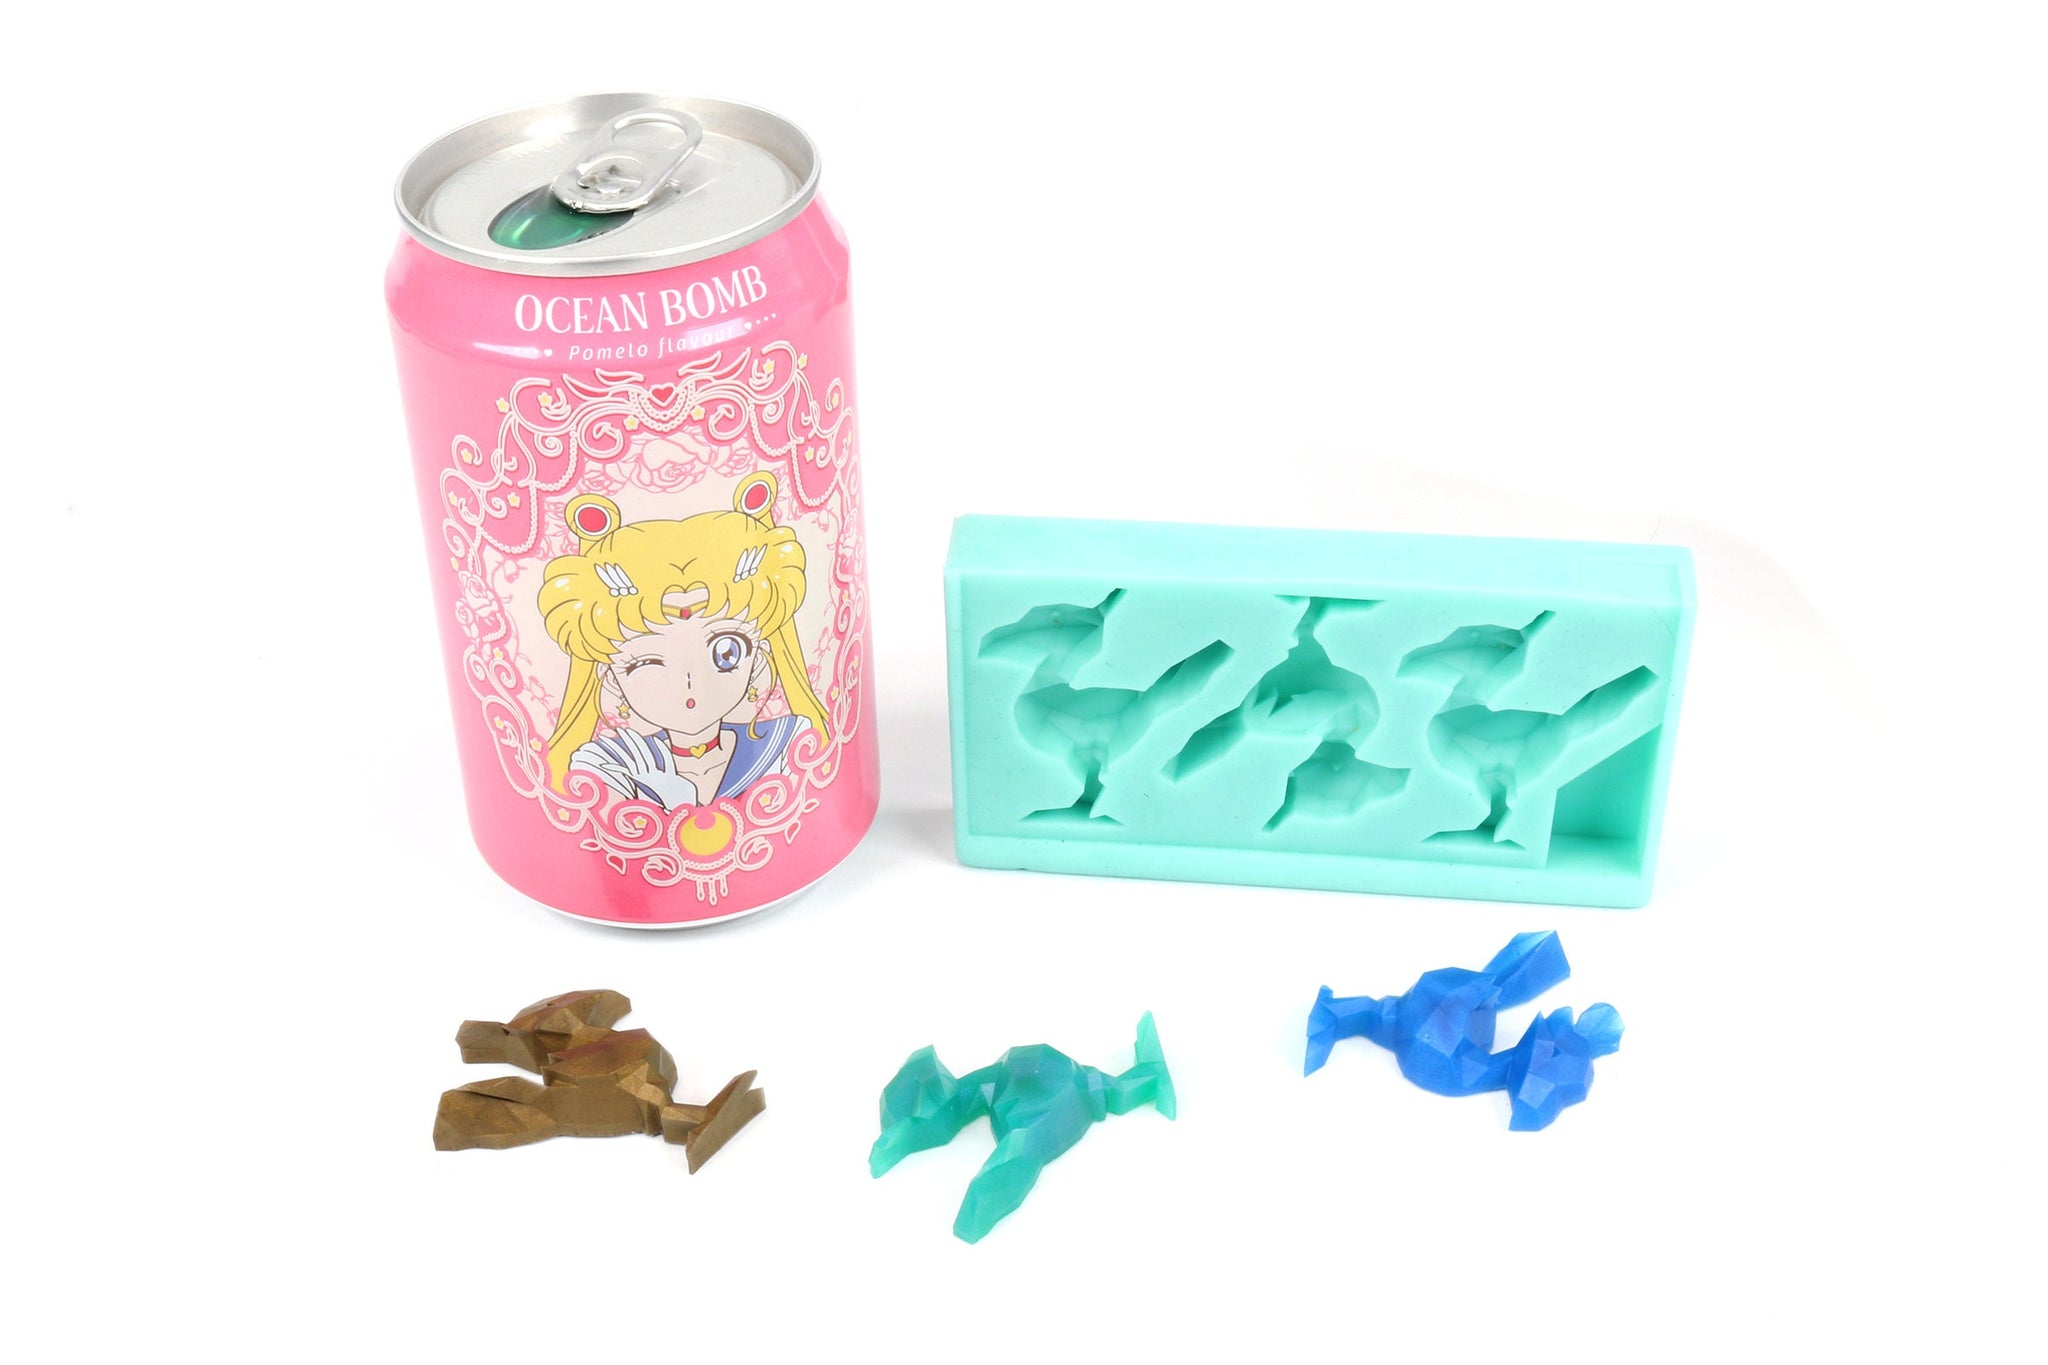 Bird Shaker Resin Casting, Bird Mold, 8 bit mold- Decoden DIY Molds For Resin, Candy Molds, Food, or Soap MLD2